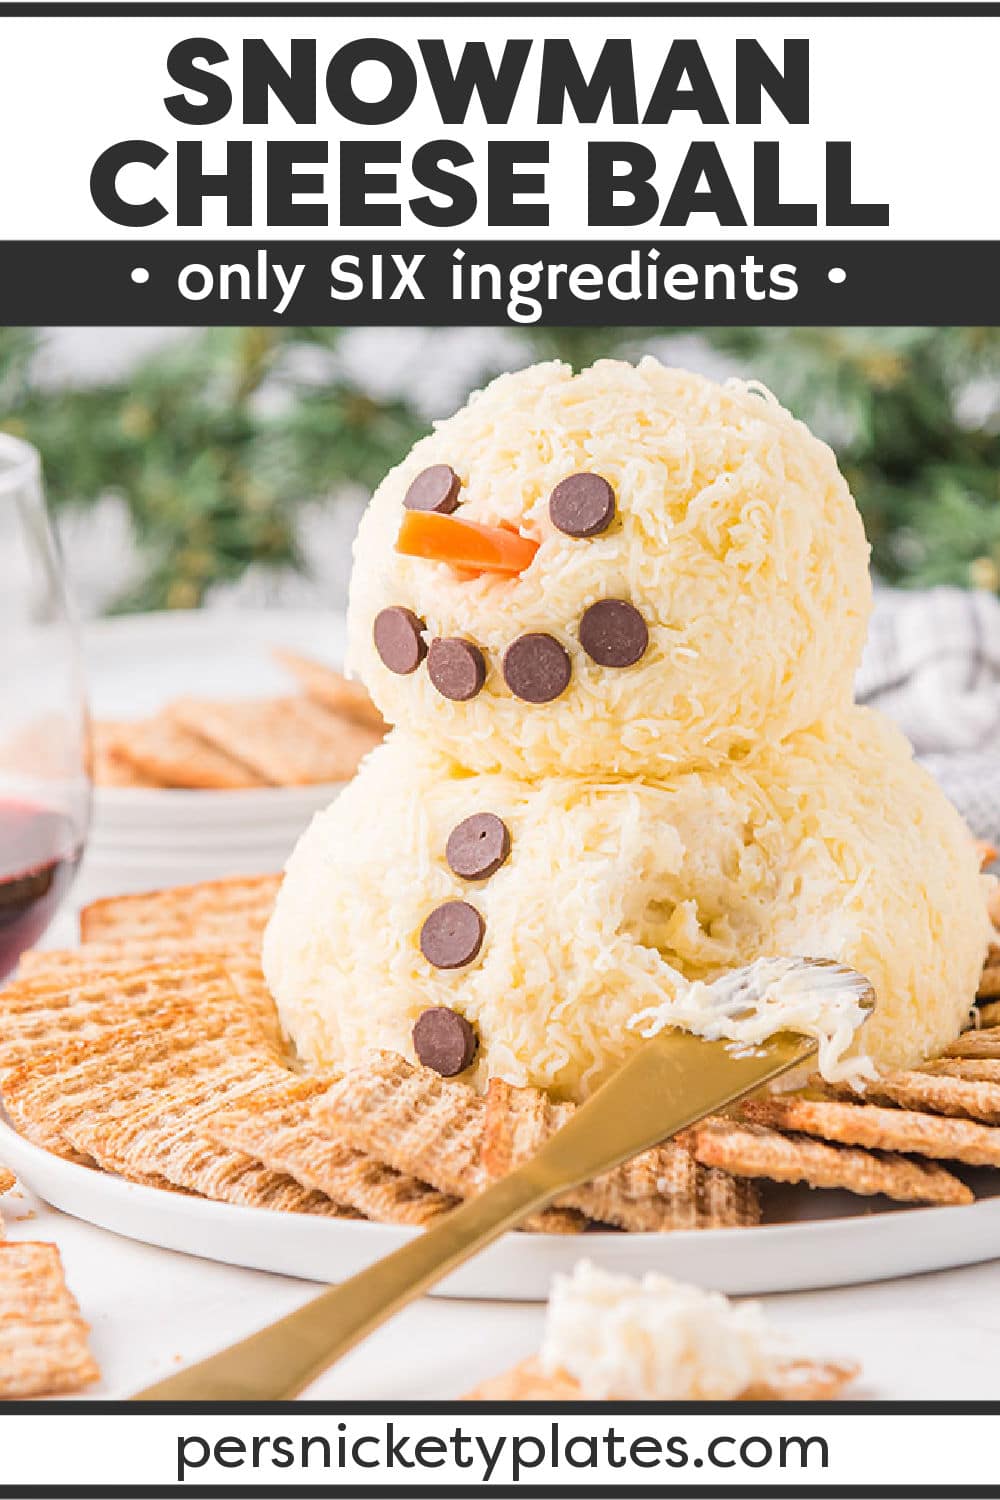 This easy, festive, and super adorable Snowman Cheese Ball is the perfect appetizer made with two different kinds of cheese for the body and fun add-ons for the face! It’s a simple, cost-effective way to delight your friends and family during the holiday season! | www.persnicketyplates.com